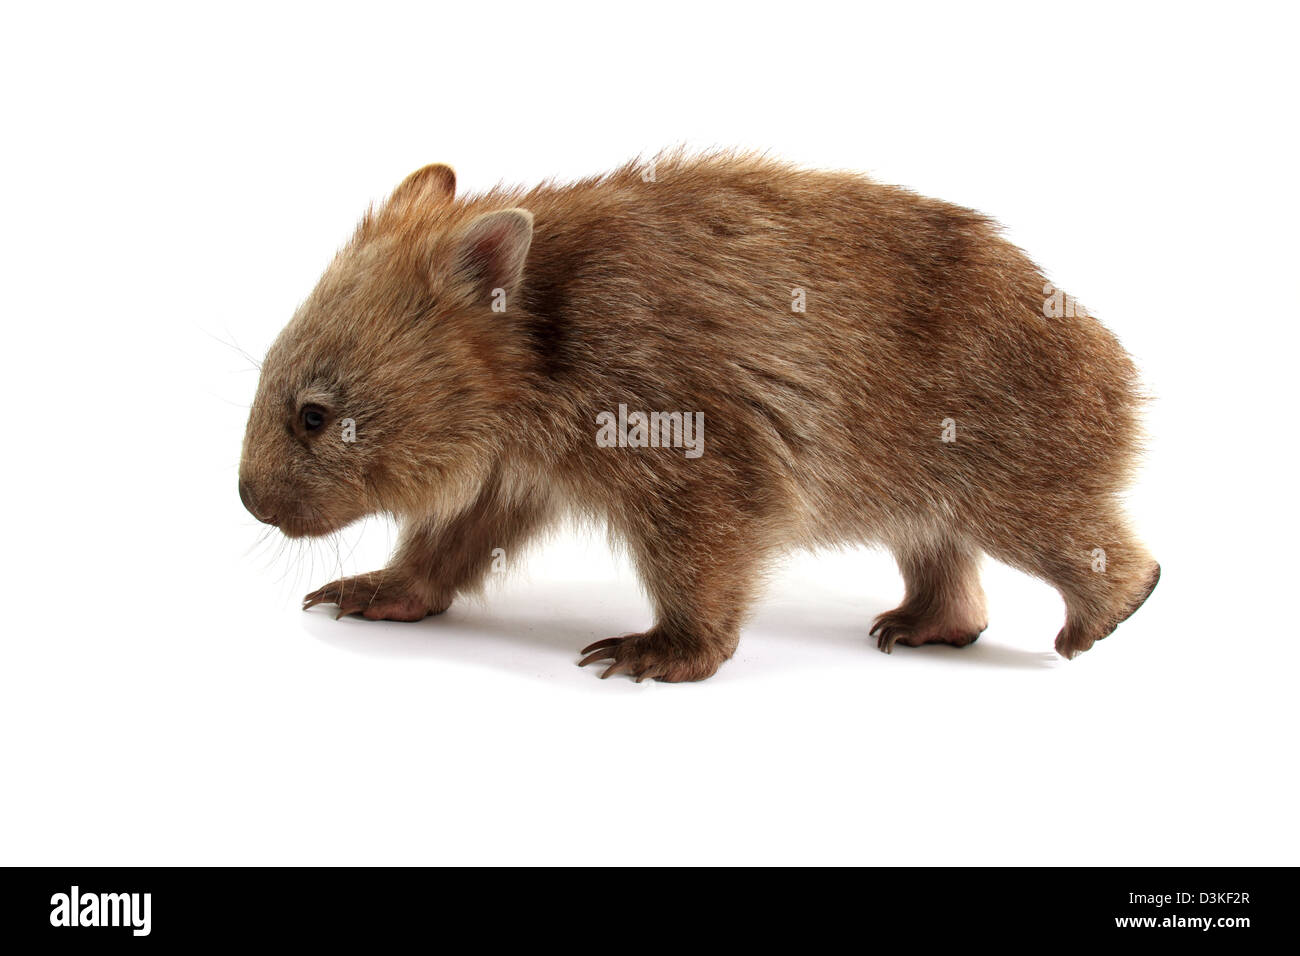 Common wombat photographed in a studio Stock Photo